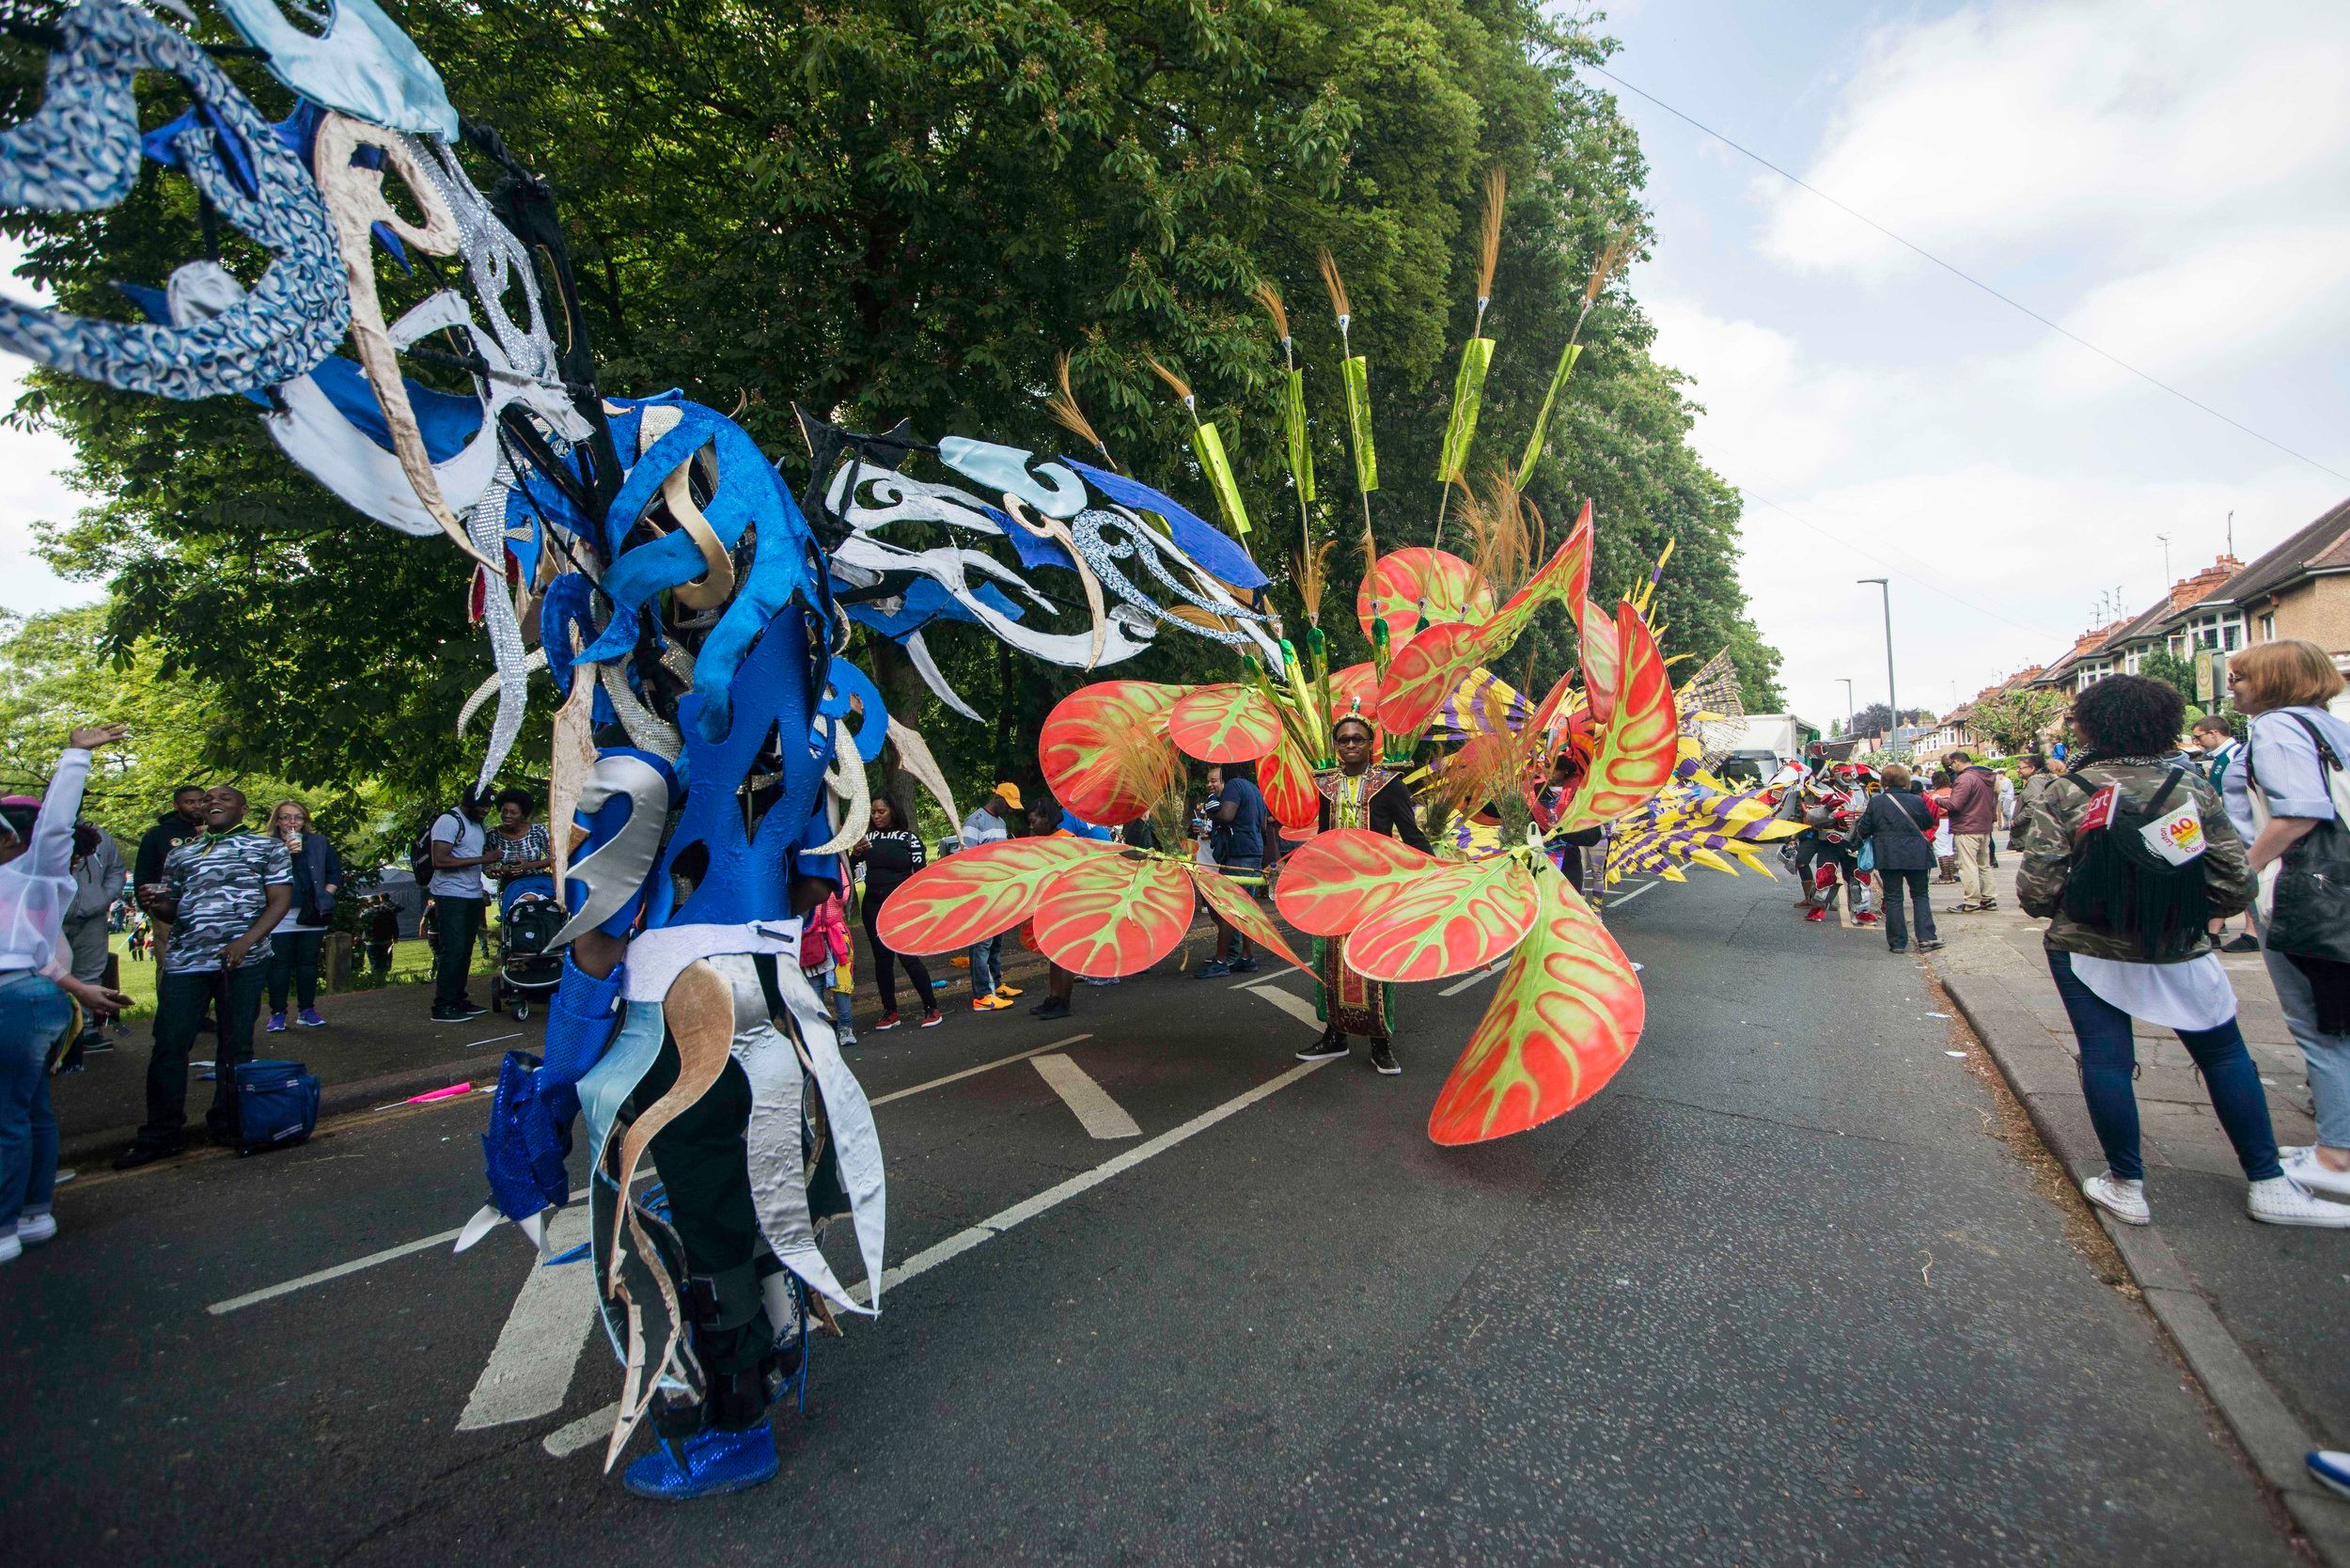 Luton Carnival with many people in colorful costumes